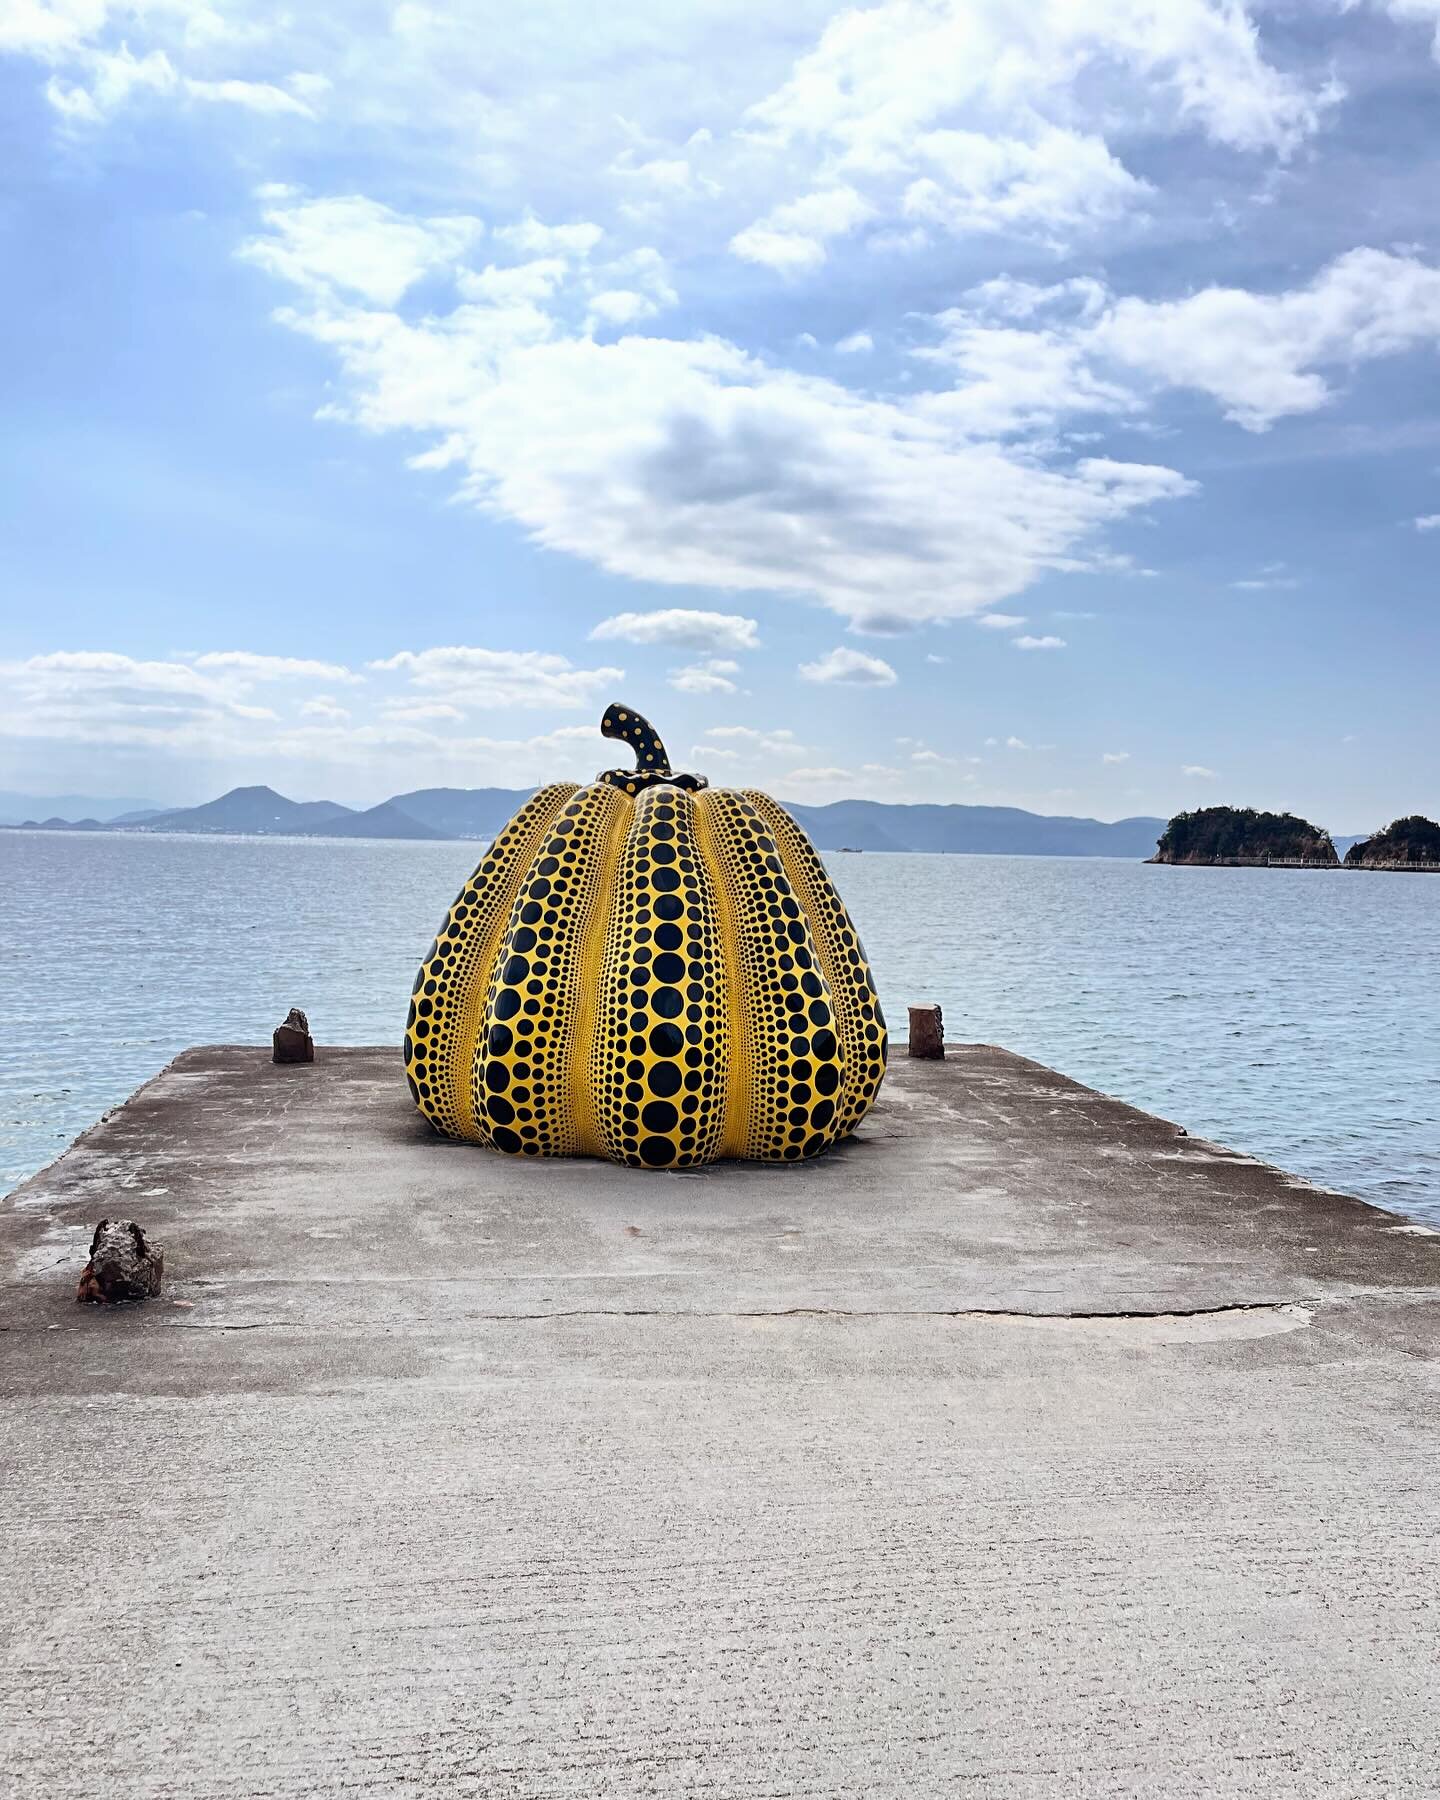 Words cannot express how truely remarkable @naoshimaisland is. The artworks are so immersive and incredibly beautiful. @tadao.ando #jamesturrell #walterdemaria #chichumuseum @arthouseprojects #contemporaryart @cameronanthes